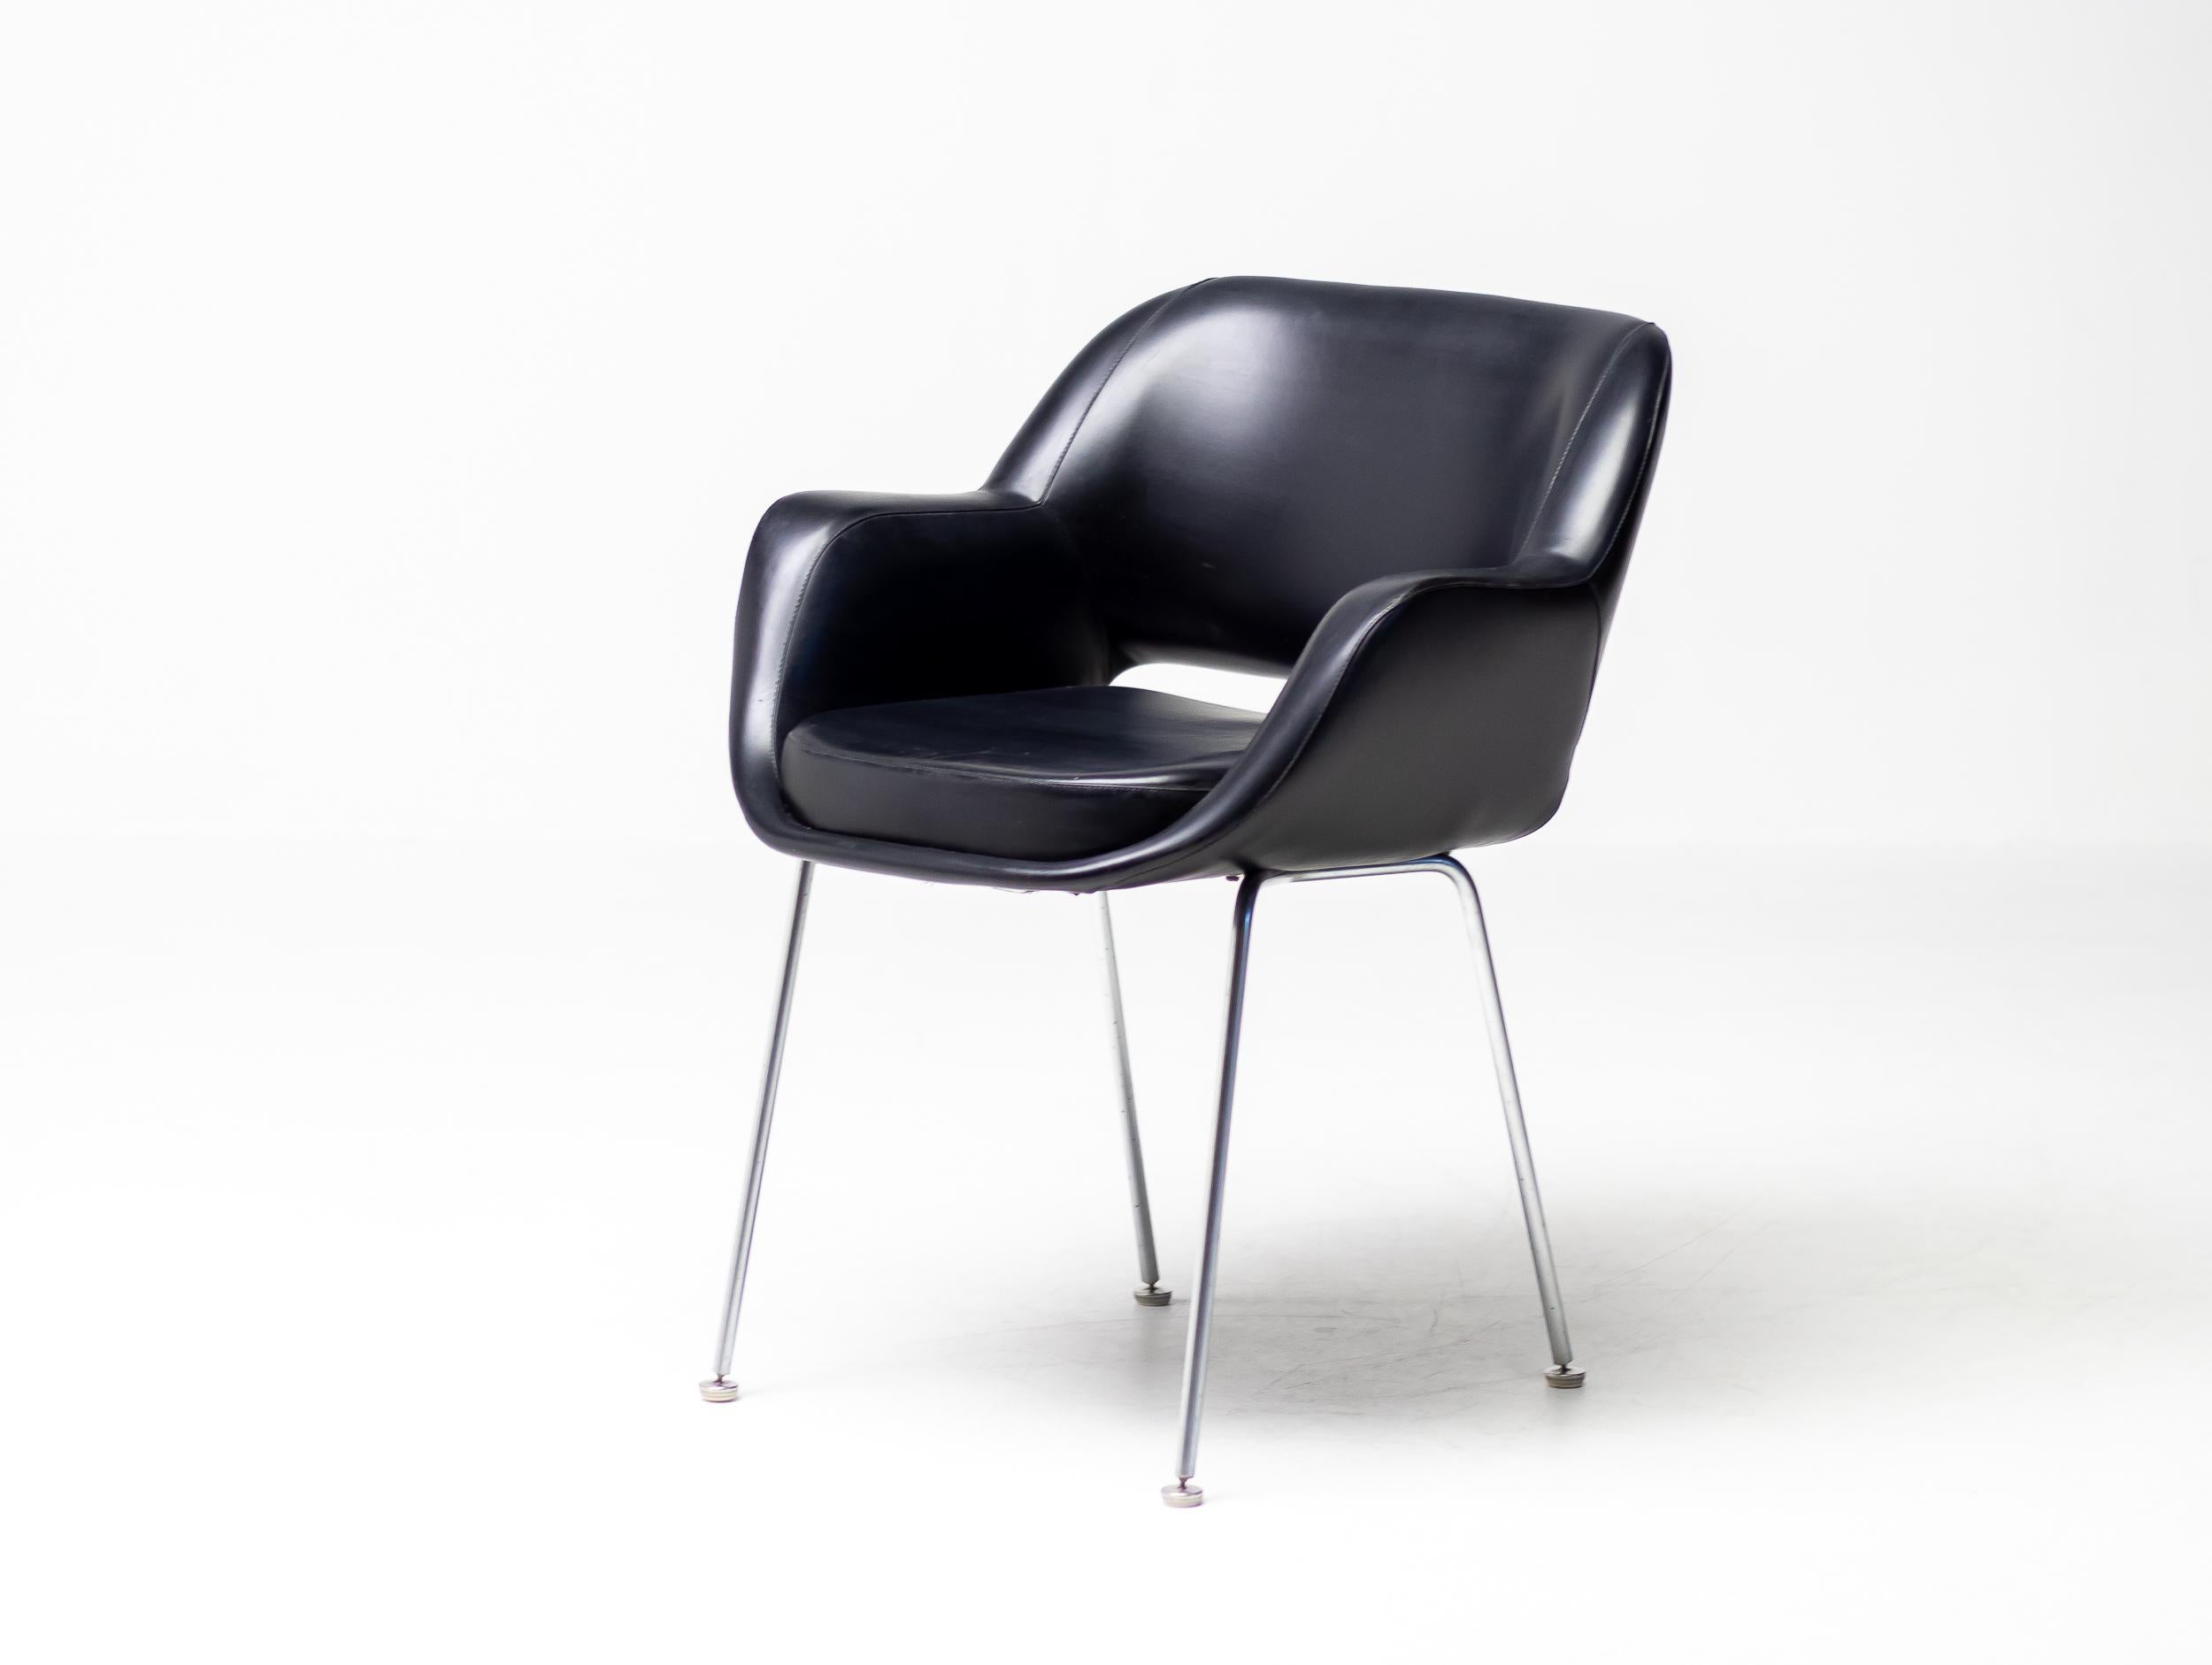 This elegant Kilta chair was designed by Finland designer Olli Mannermaa for Martela. 
The Kilta chair is a Finnish design Classic. Kilta’s timeless design and very comfortable seating guarantee its continuing popularity. It is a popular vintage